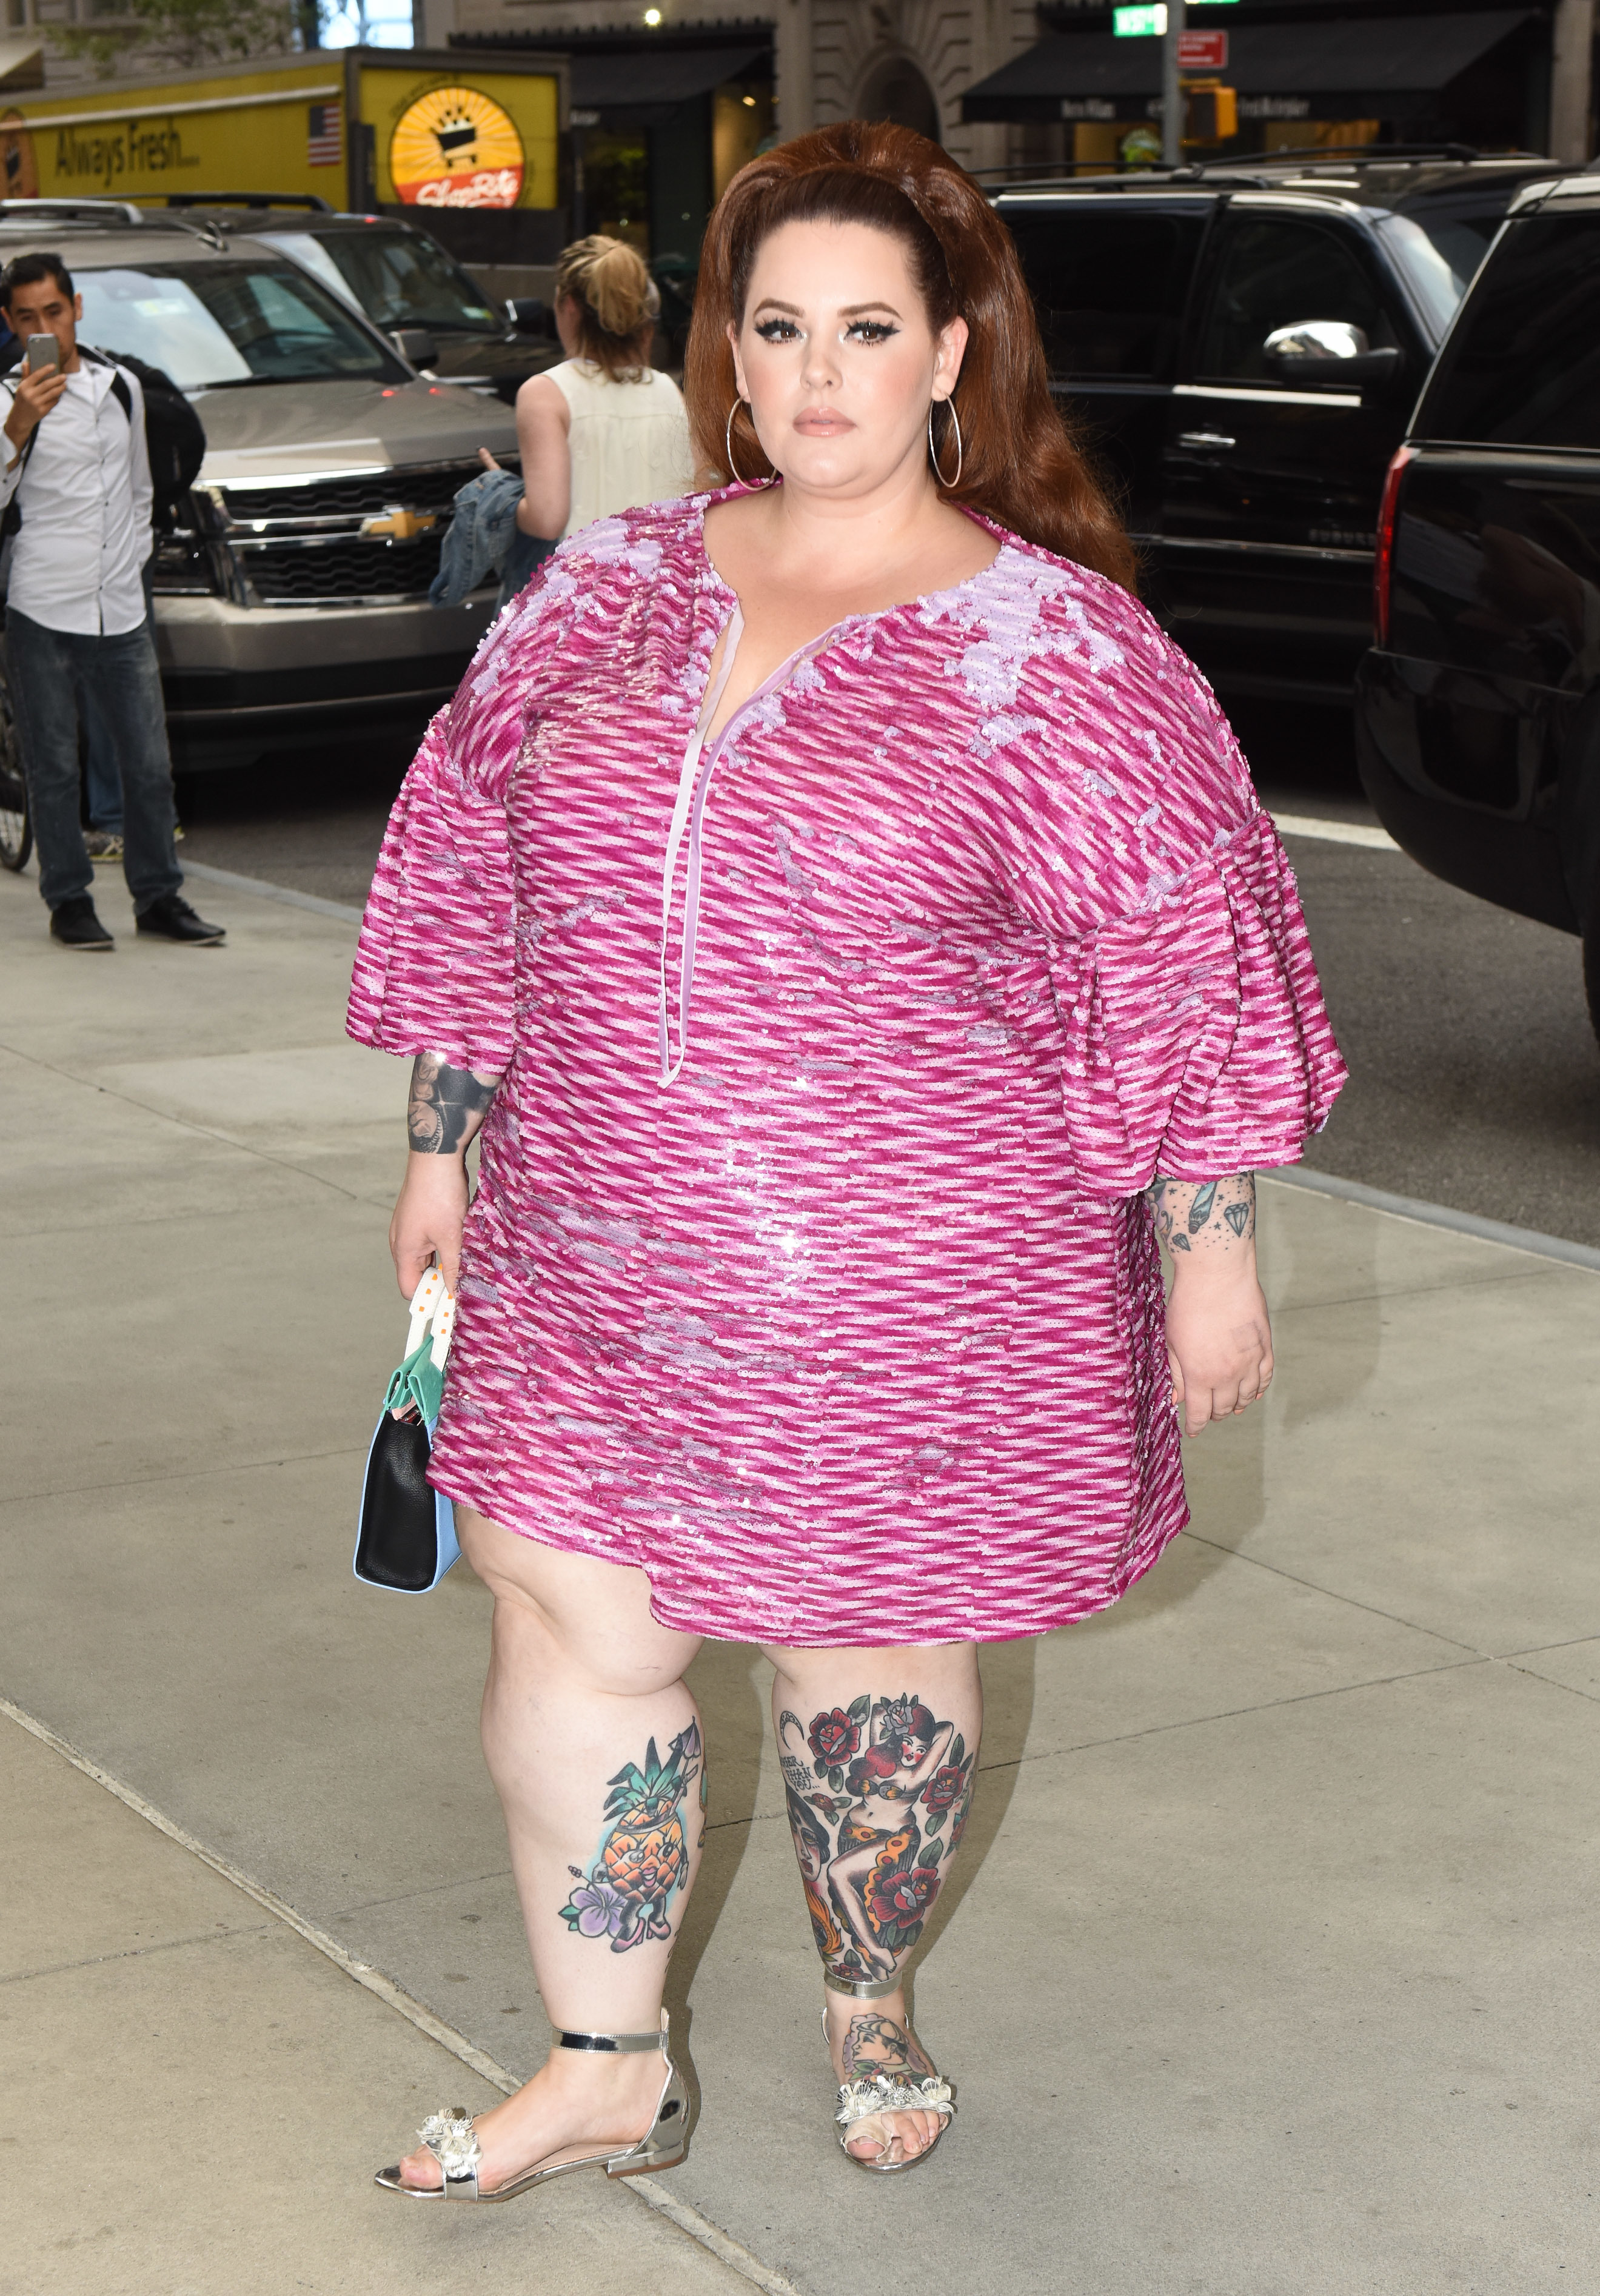 People who liked Tess Holliday's feet, also liked.